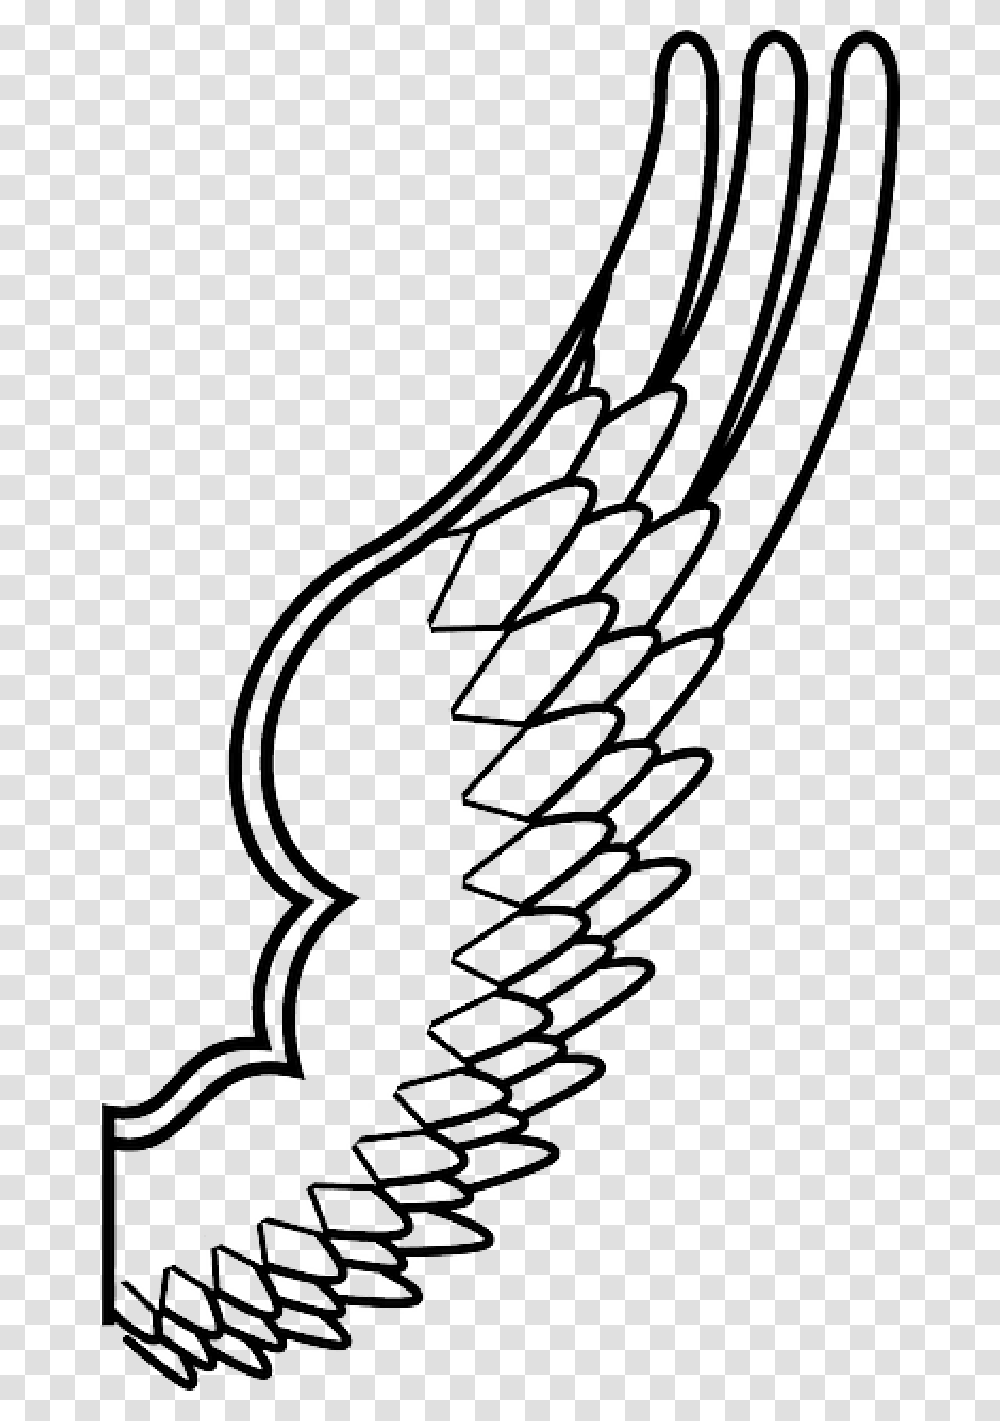 Spread Drawing Design Angel Wing Feathers Wing Outline, Stencil Transparent Png